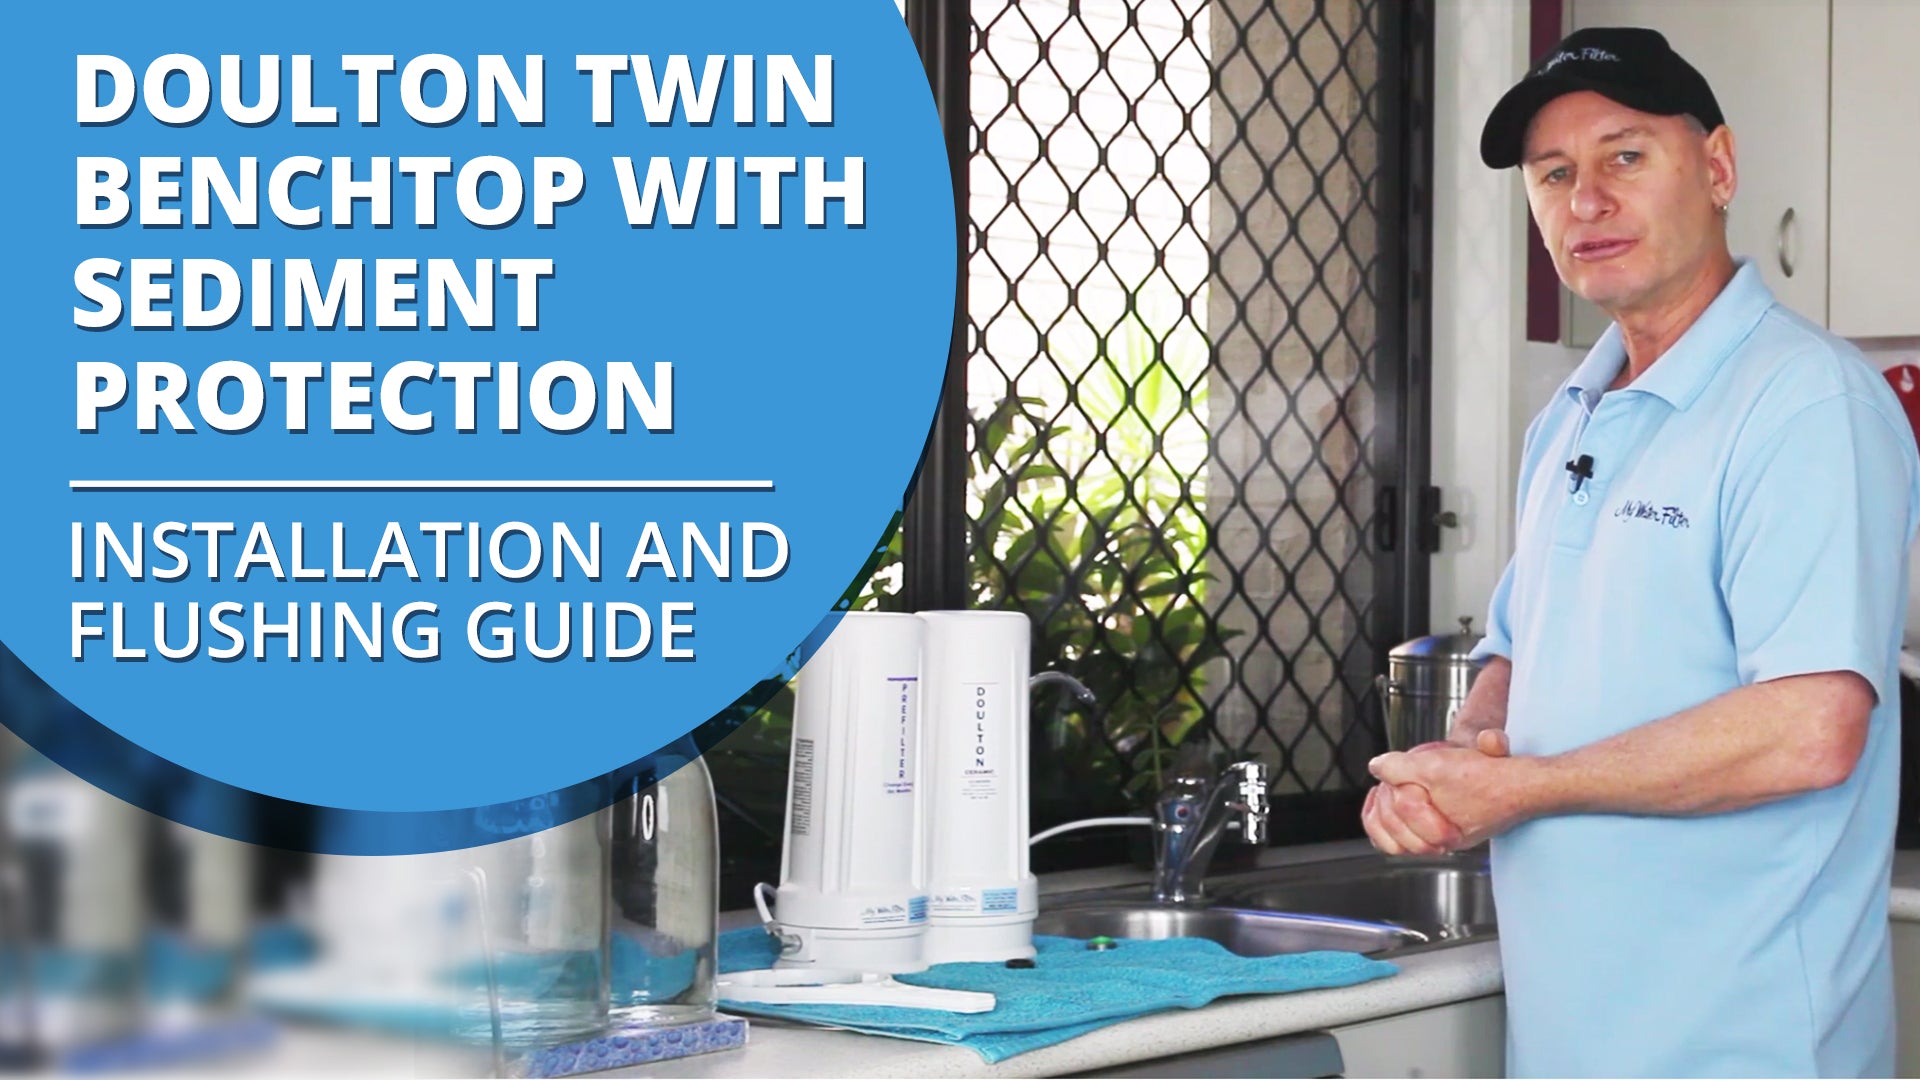 [VIDEO] How to Install and Flush your Doulton Ultracarb Twin Benchtop Water Filter w/ Sediment Protection